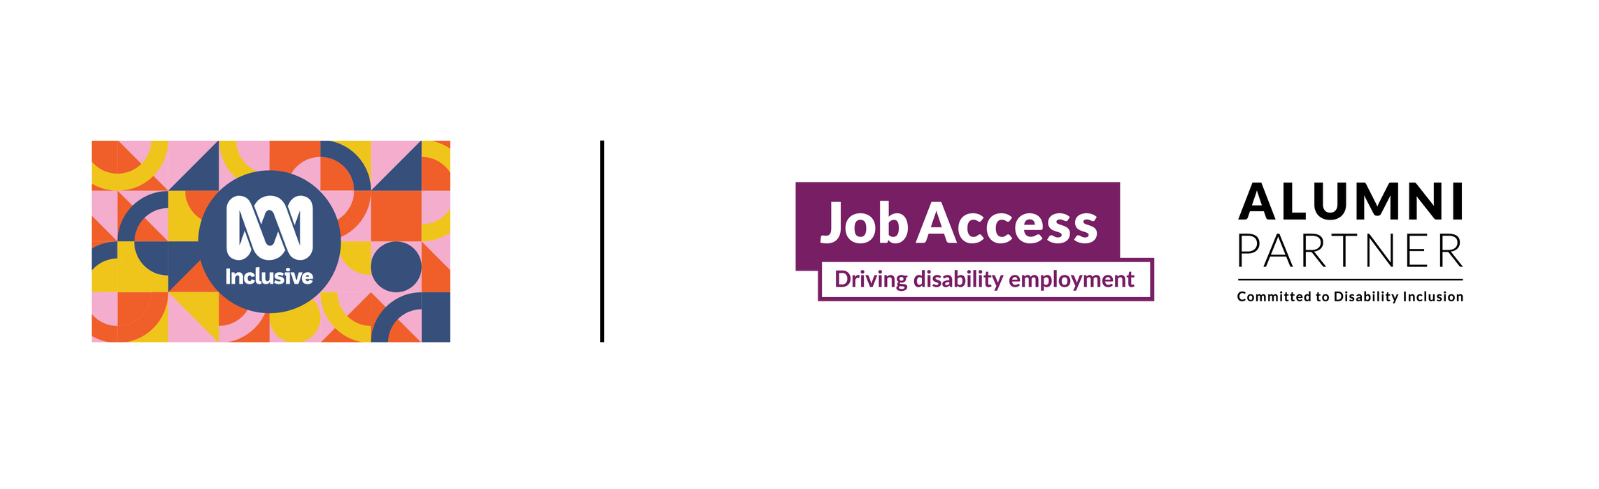 ABC Inclusive logo on the left and the JobAccess Alumni Partner logo on the right